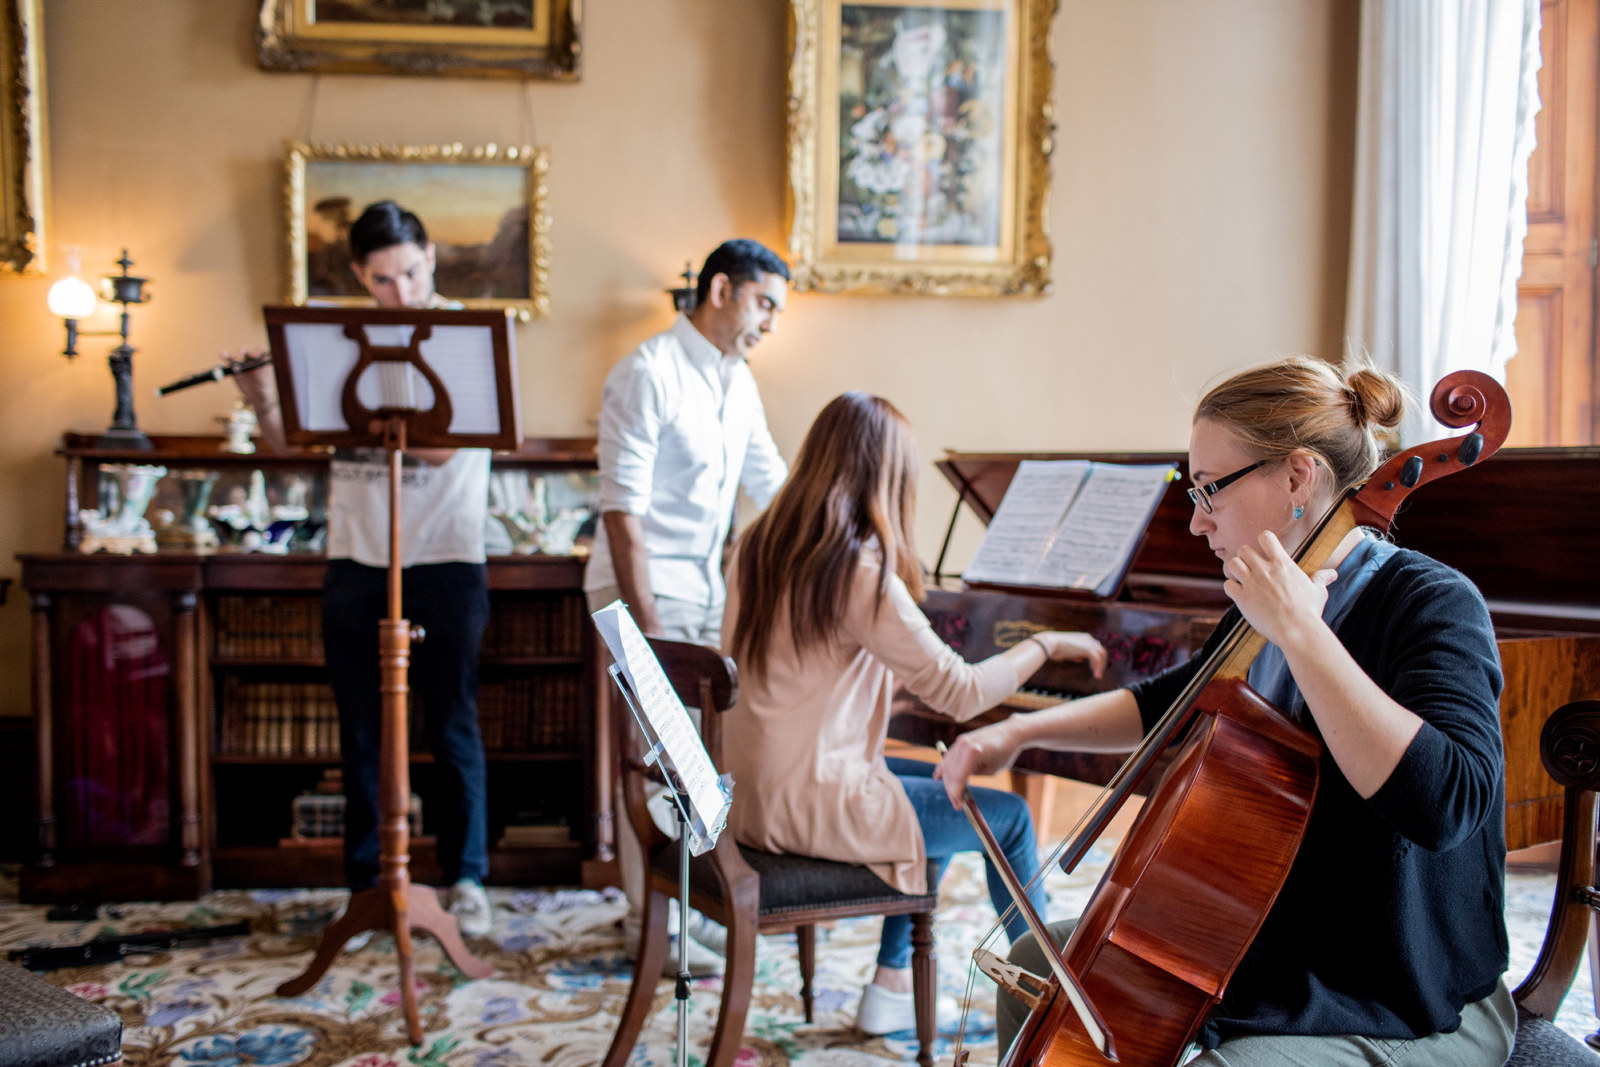 Theo Small (flute), Associate Professor Neal Peres Da Costa, Esther Kim (piano) and Jemma Thrussell (cello) from the Historical Performance Unit, Sydney Conservatorium of Music, in the drawing room at Elizabeth Bay House